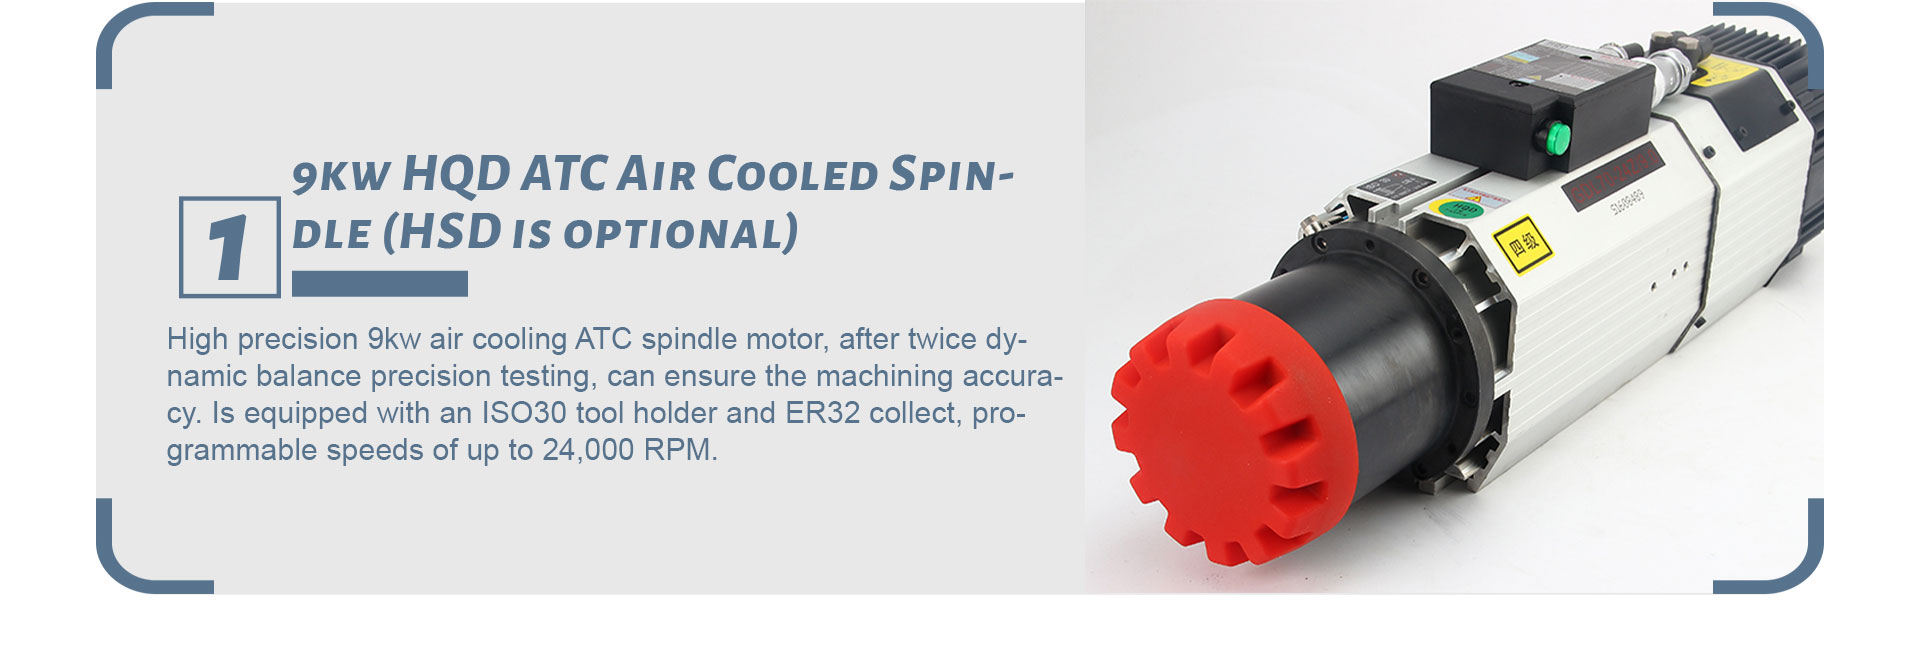 air cooled spindle